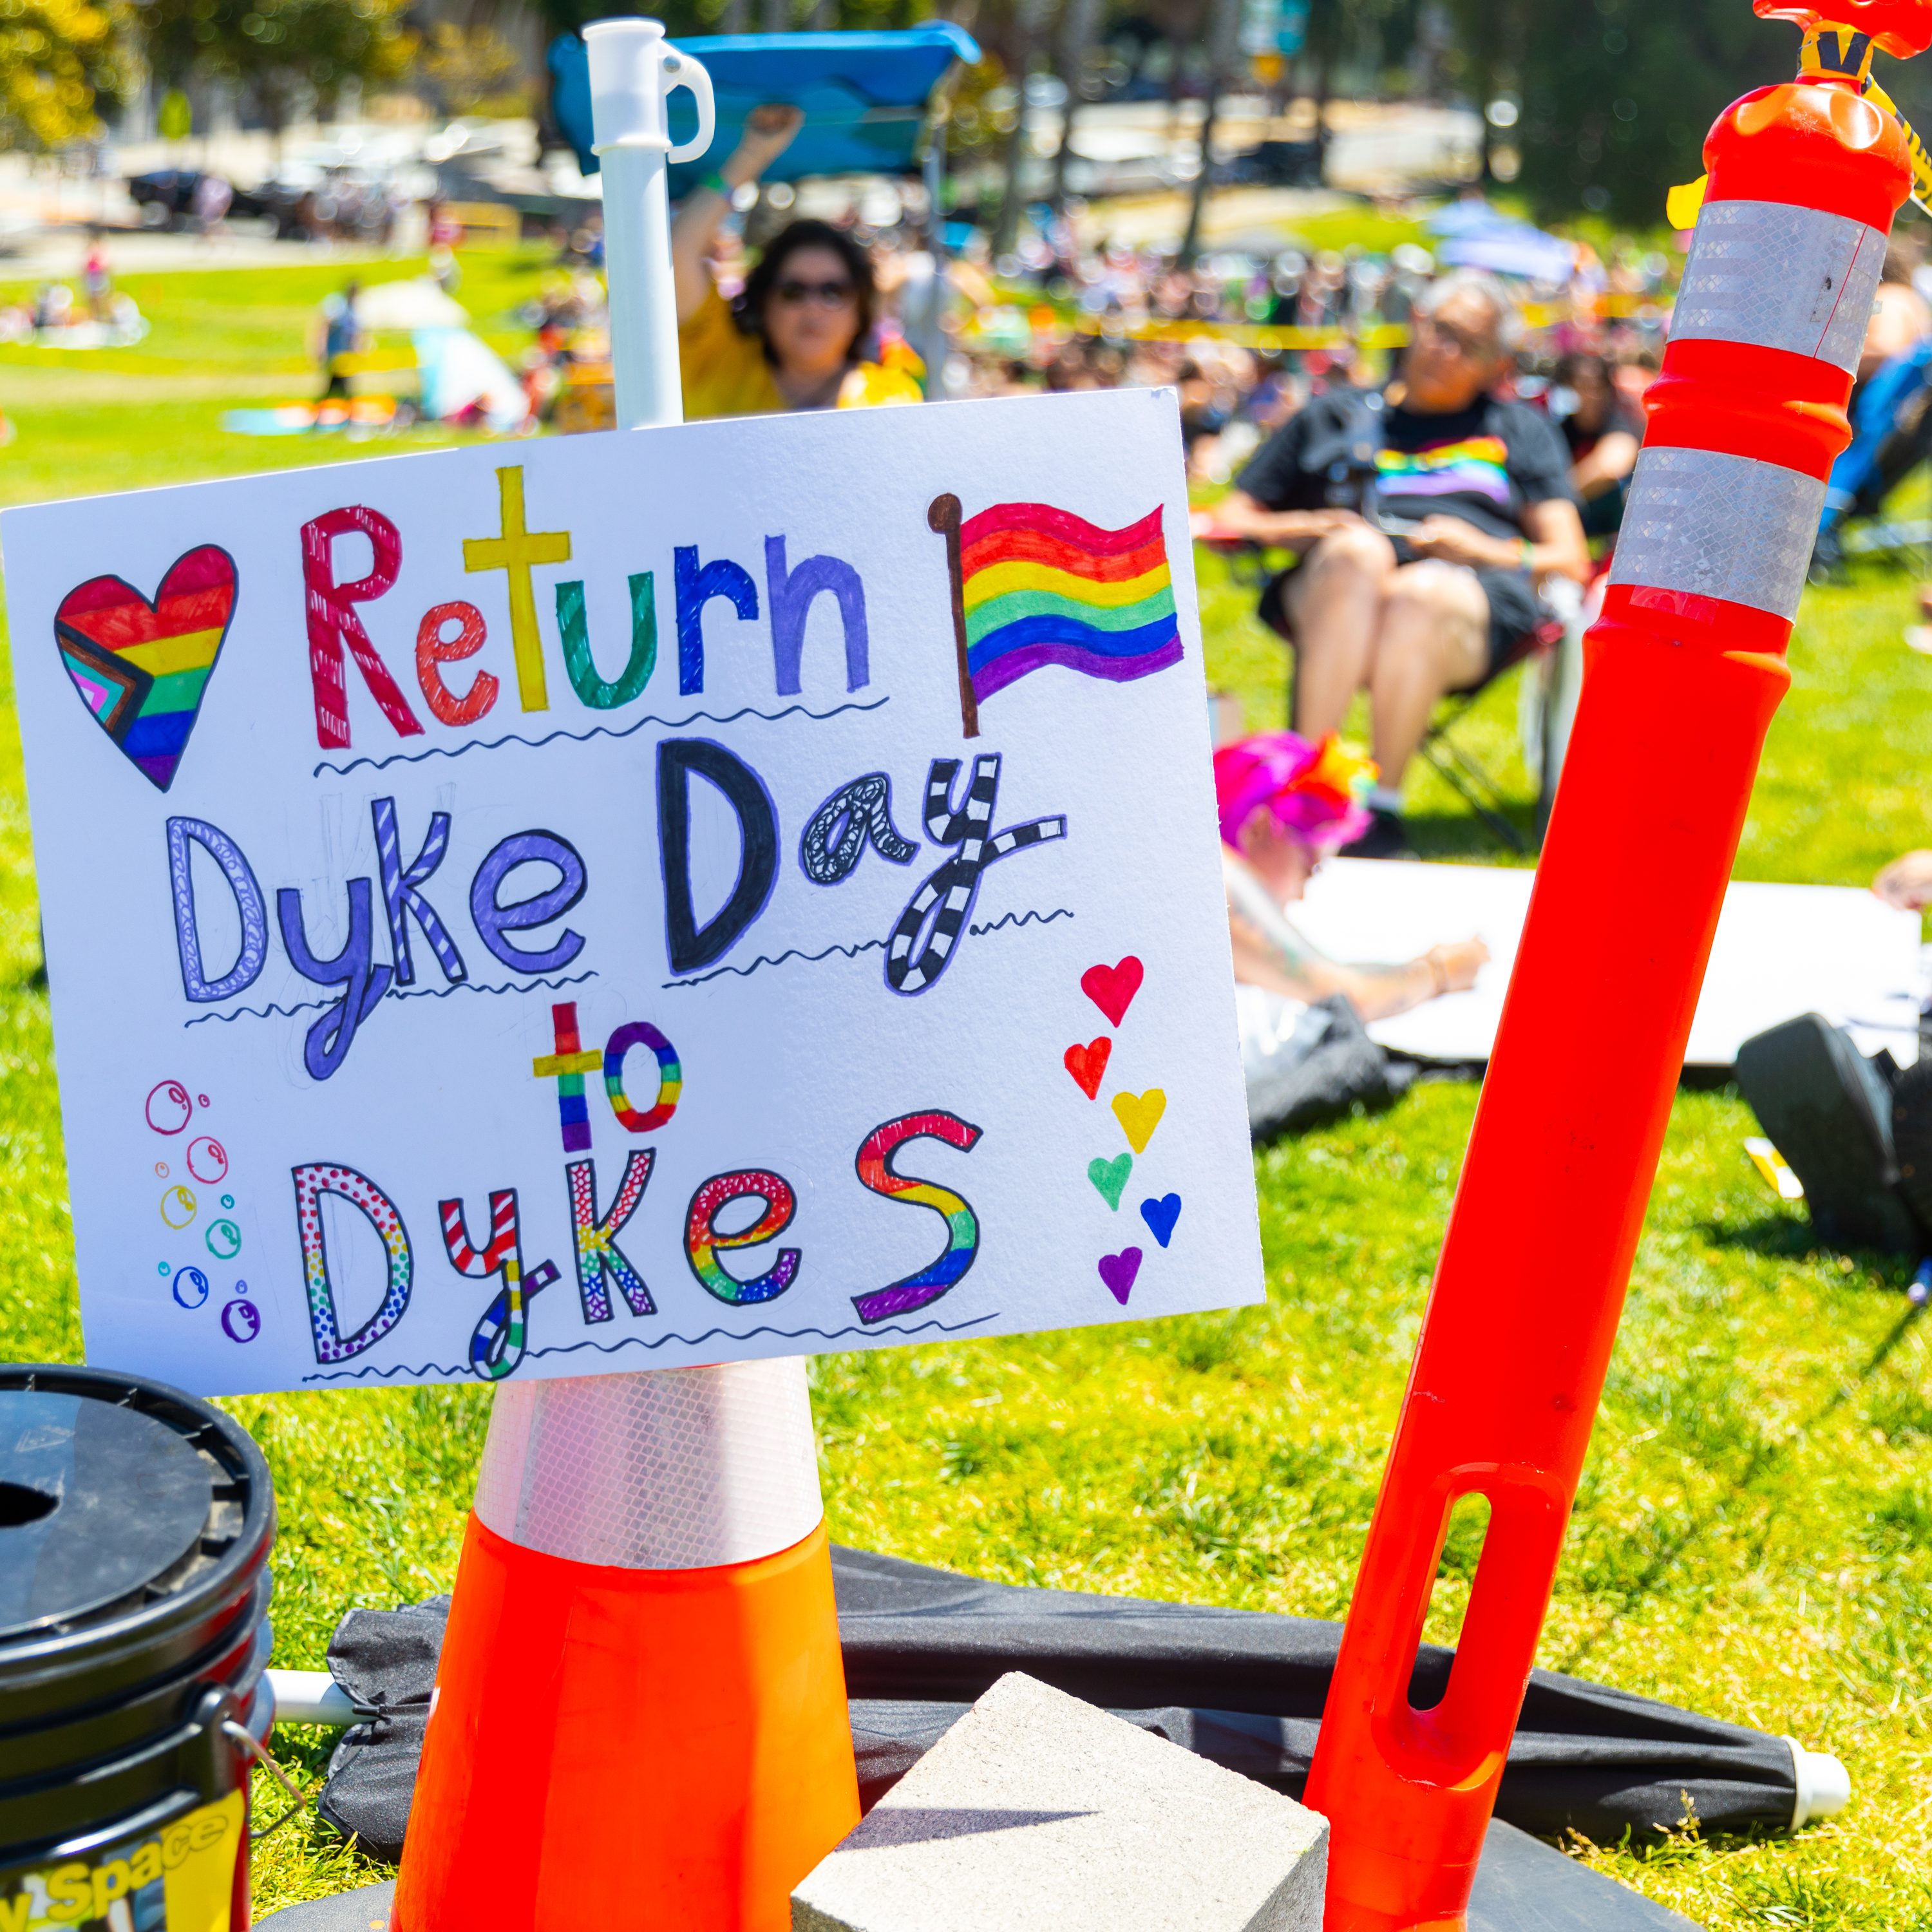 The image shows a sign with colorful text reading &quot;Return Dyke Day to Dykes&quot; with rainbow symbols, held by a cone on a grassy field with people in the background.